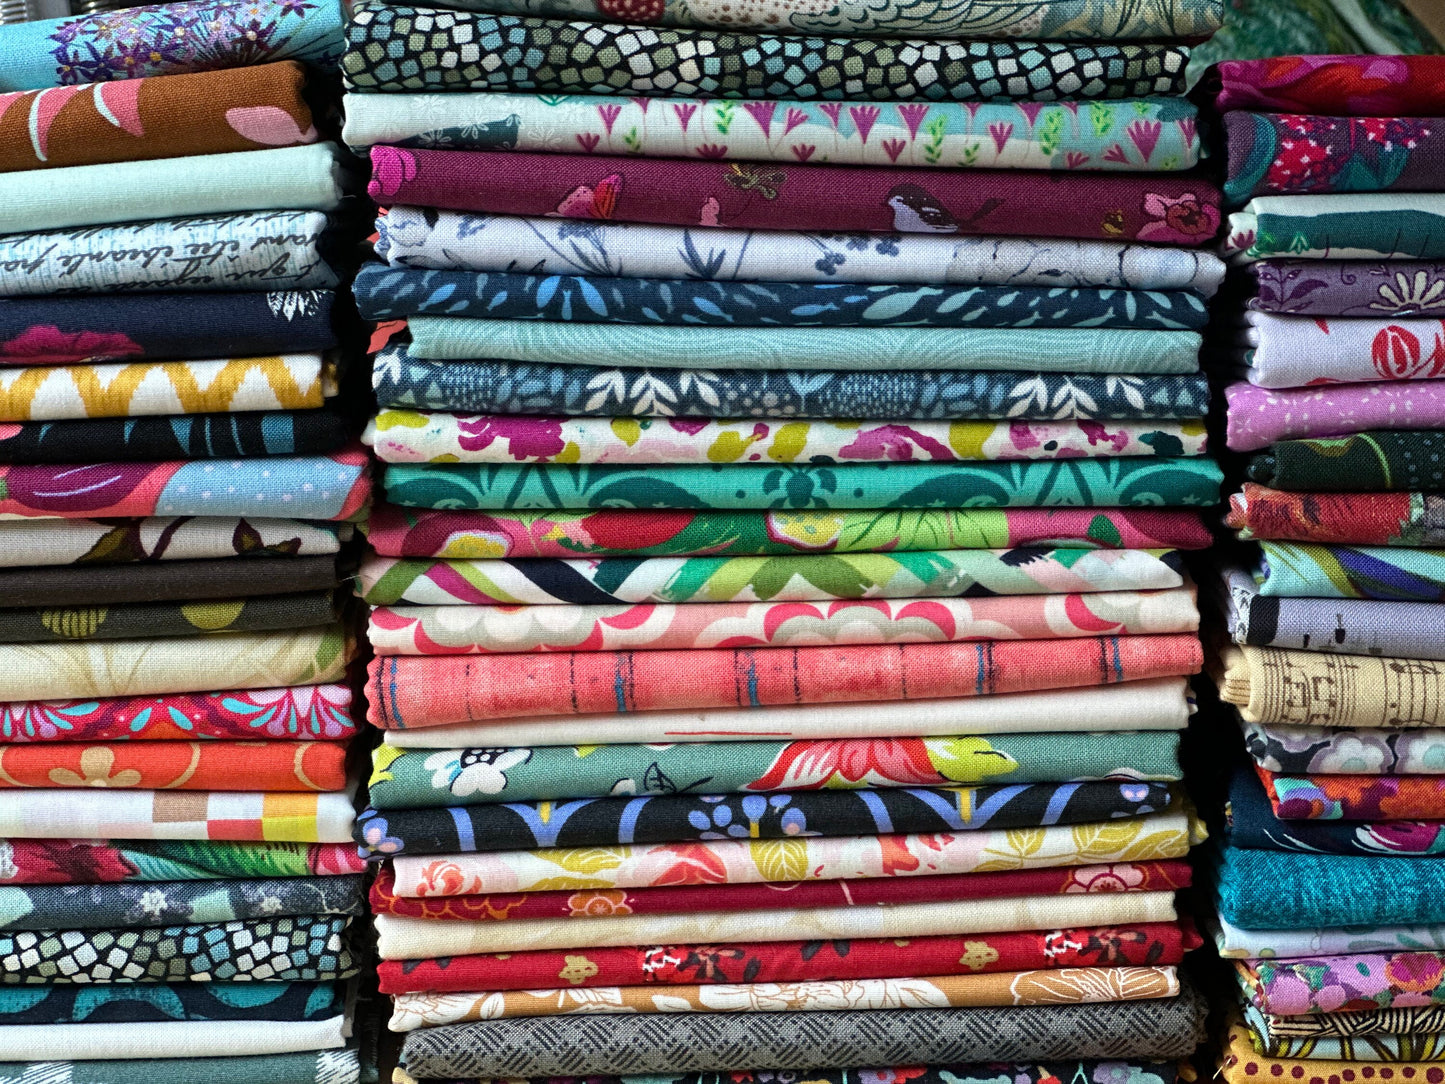 Quilt Fabric Scrap Bundle, Fabric Remnants, Designer Fabric Bundle, Mystery Bundle, Cotton Fabric Scrap, Fabric Grab Bag, By the Pound